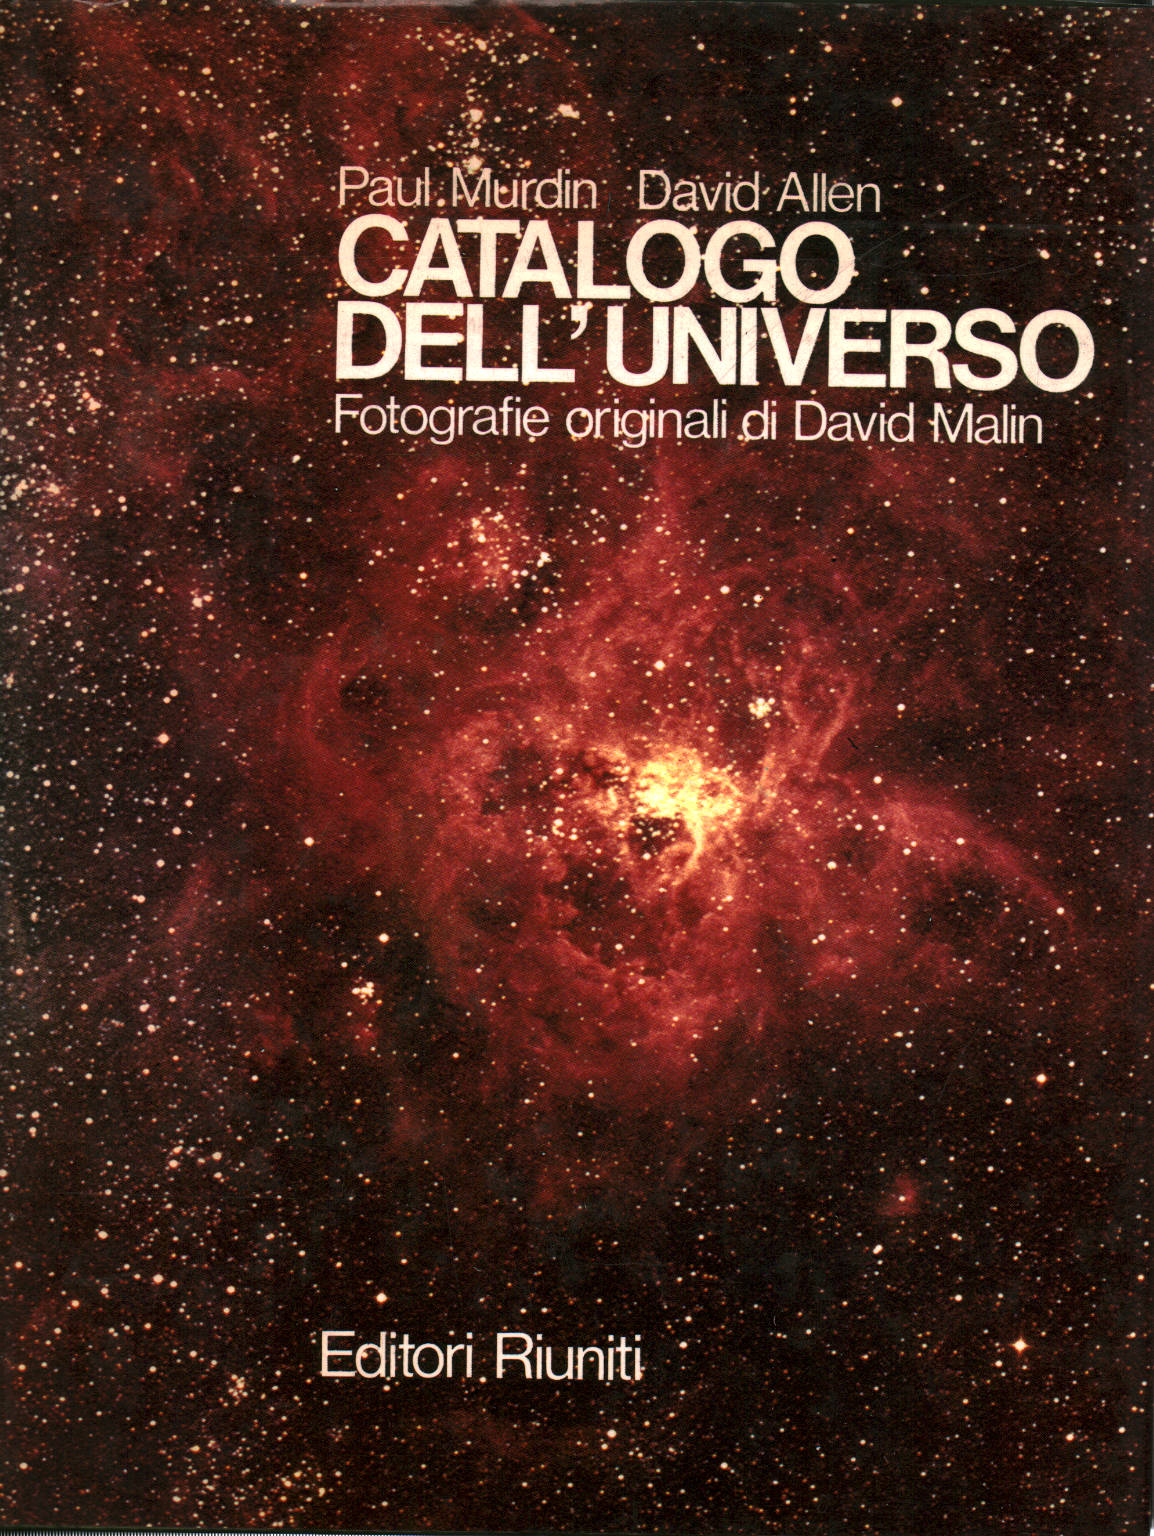 Catalogue of the Universe, s.a.